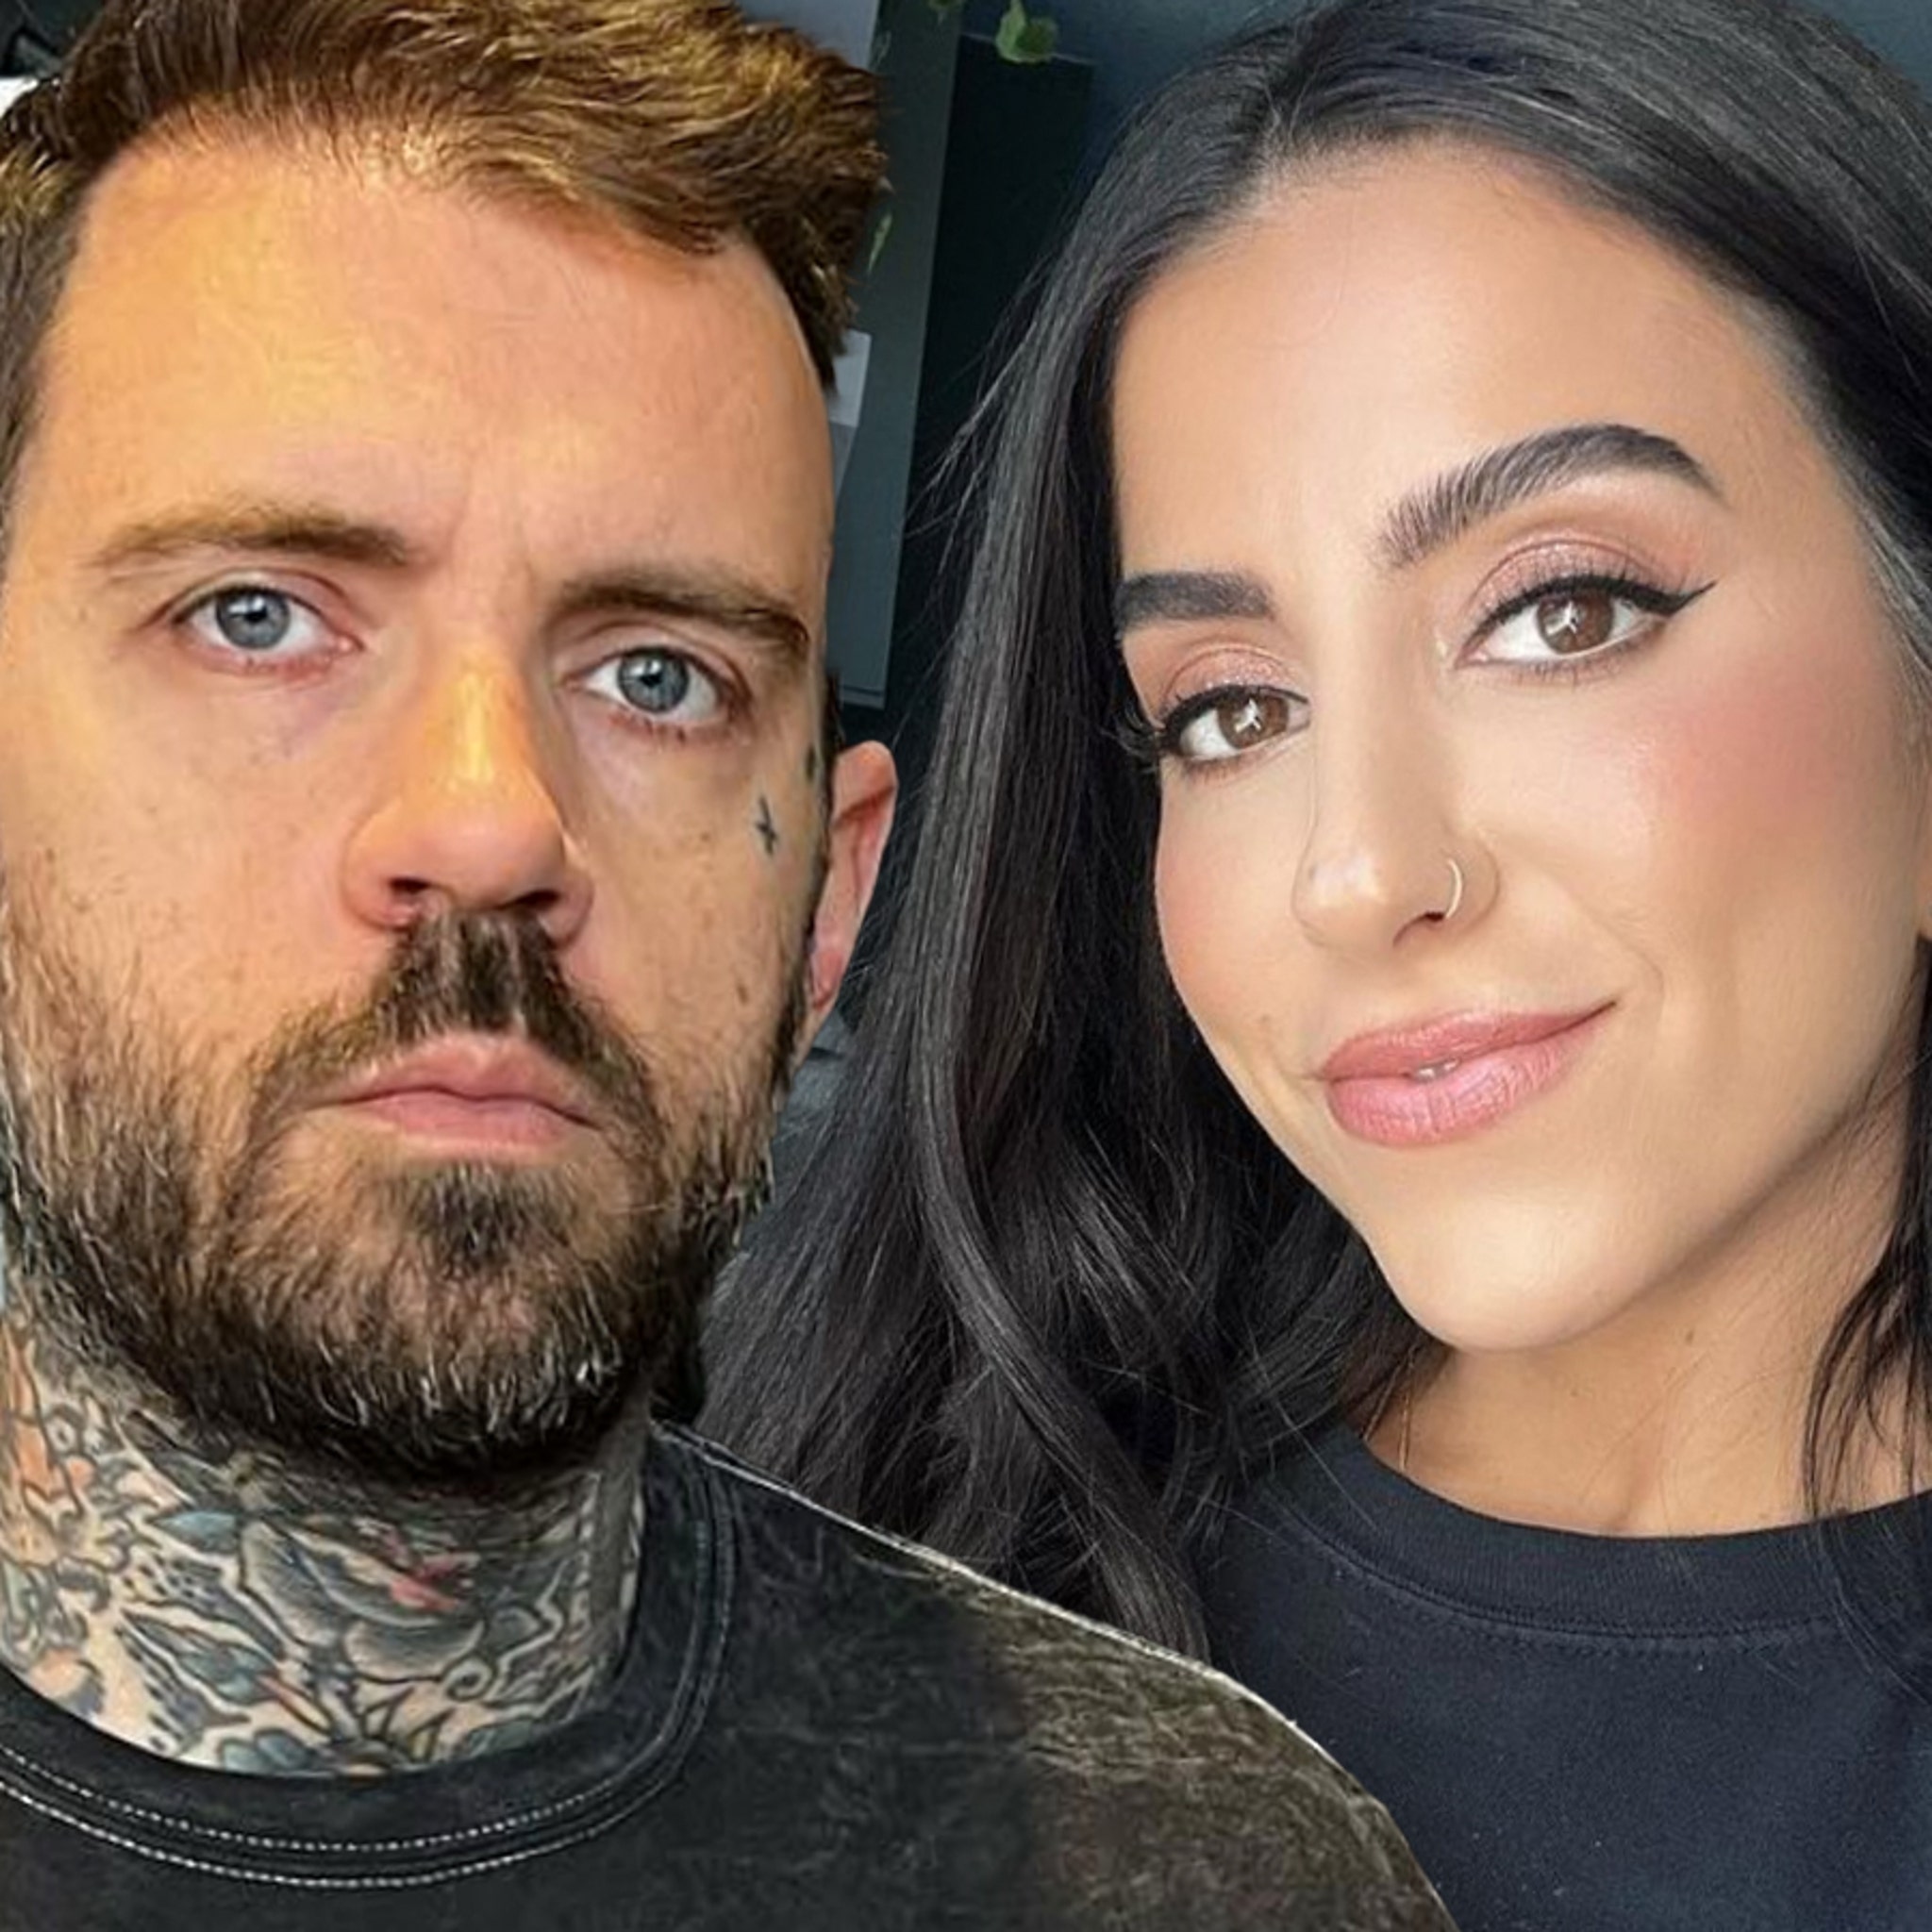 YouTuber Adam22 Fine With Wifes Porn Star Career After Getting Married image